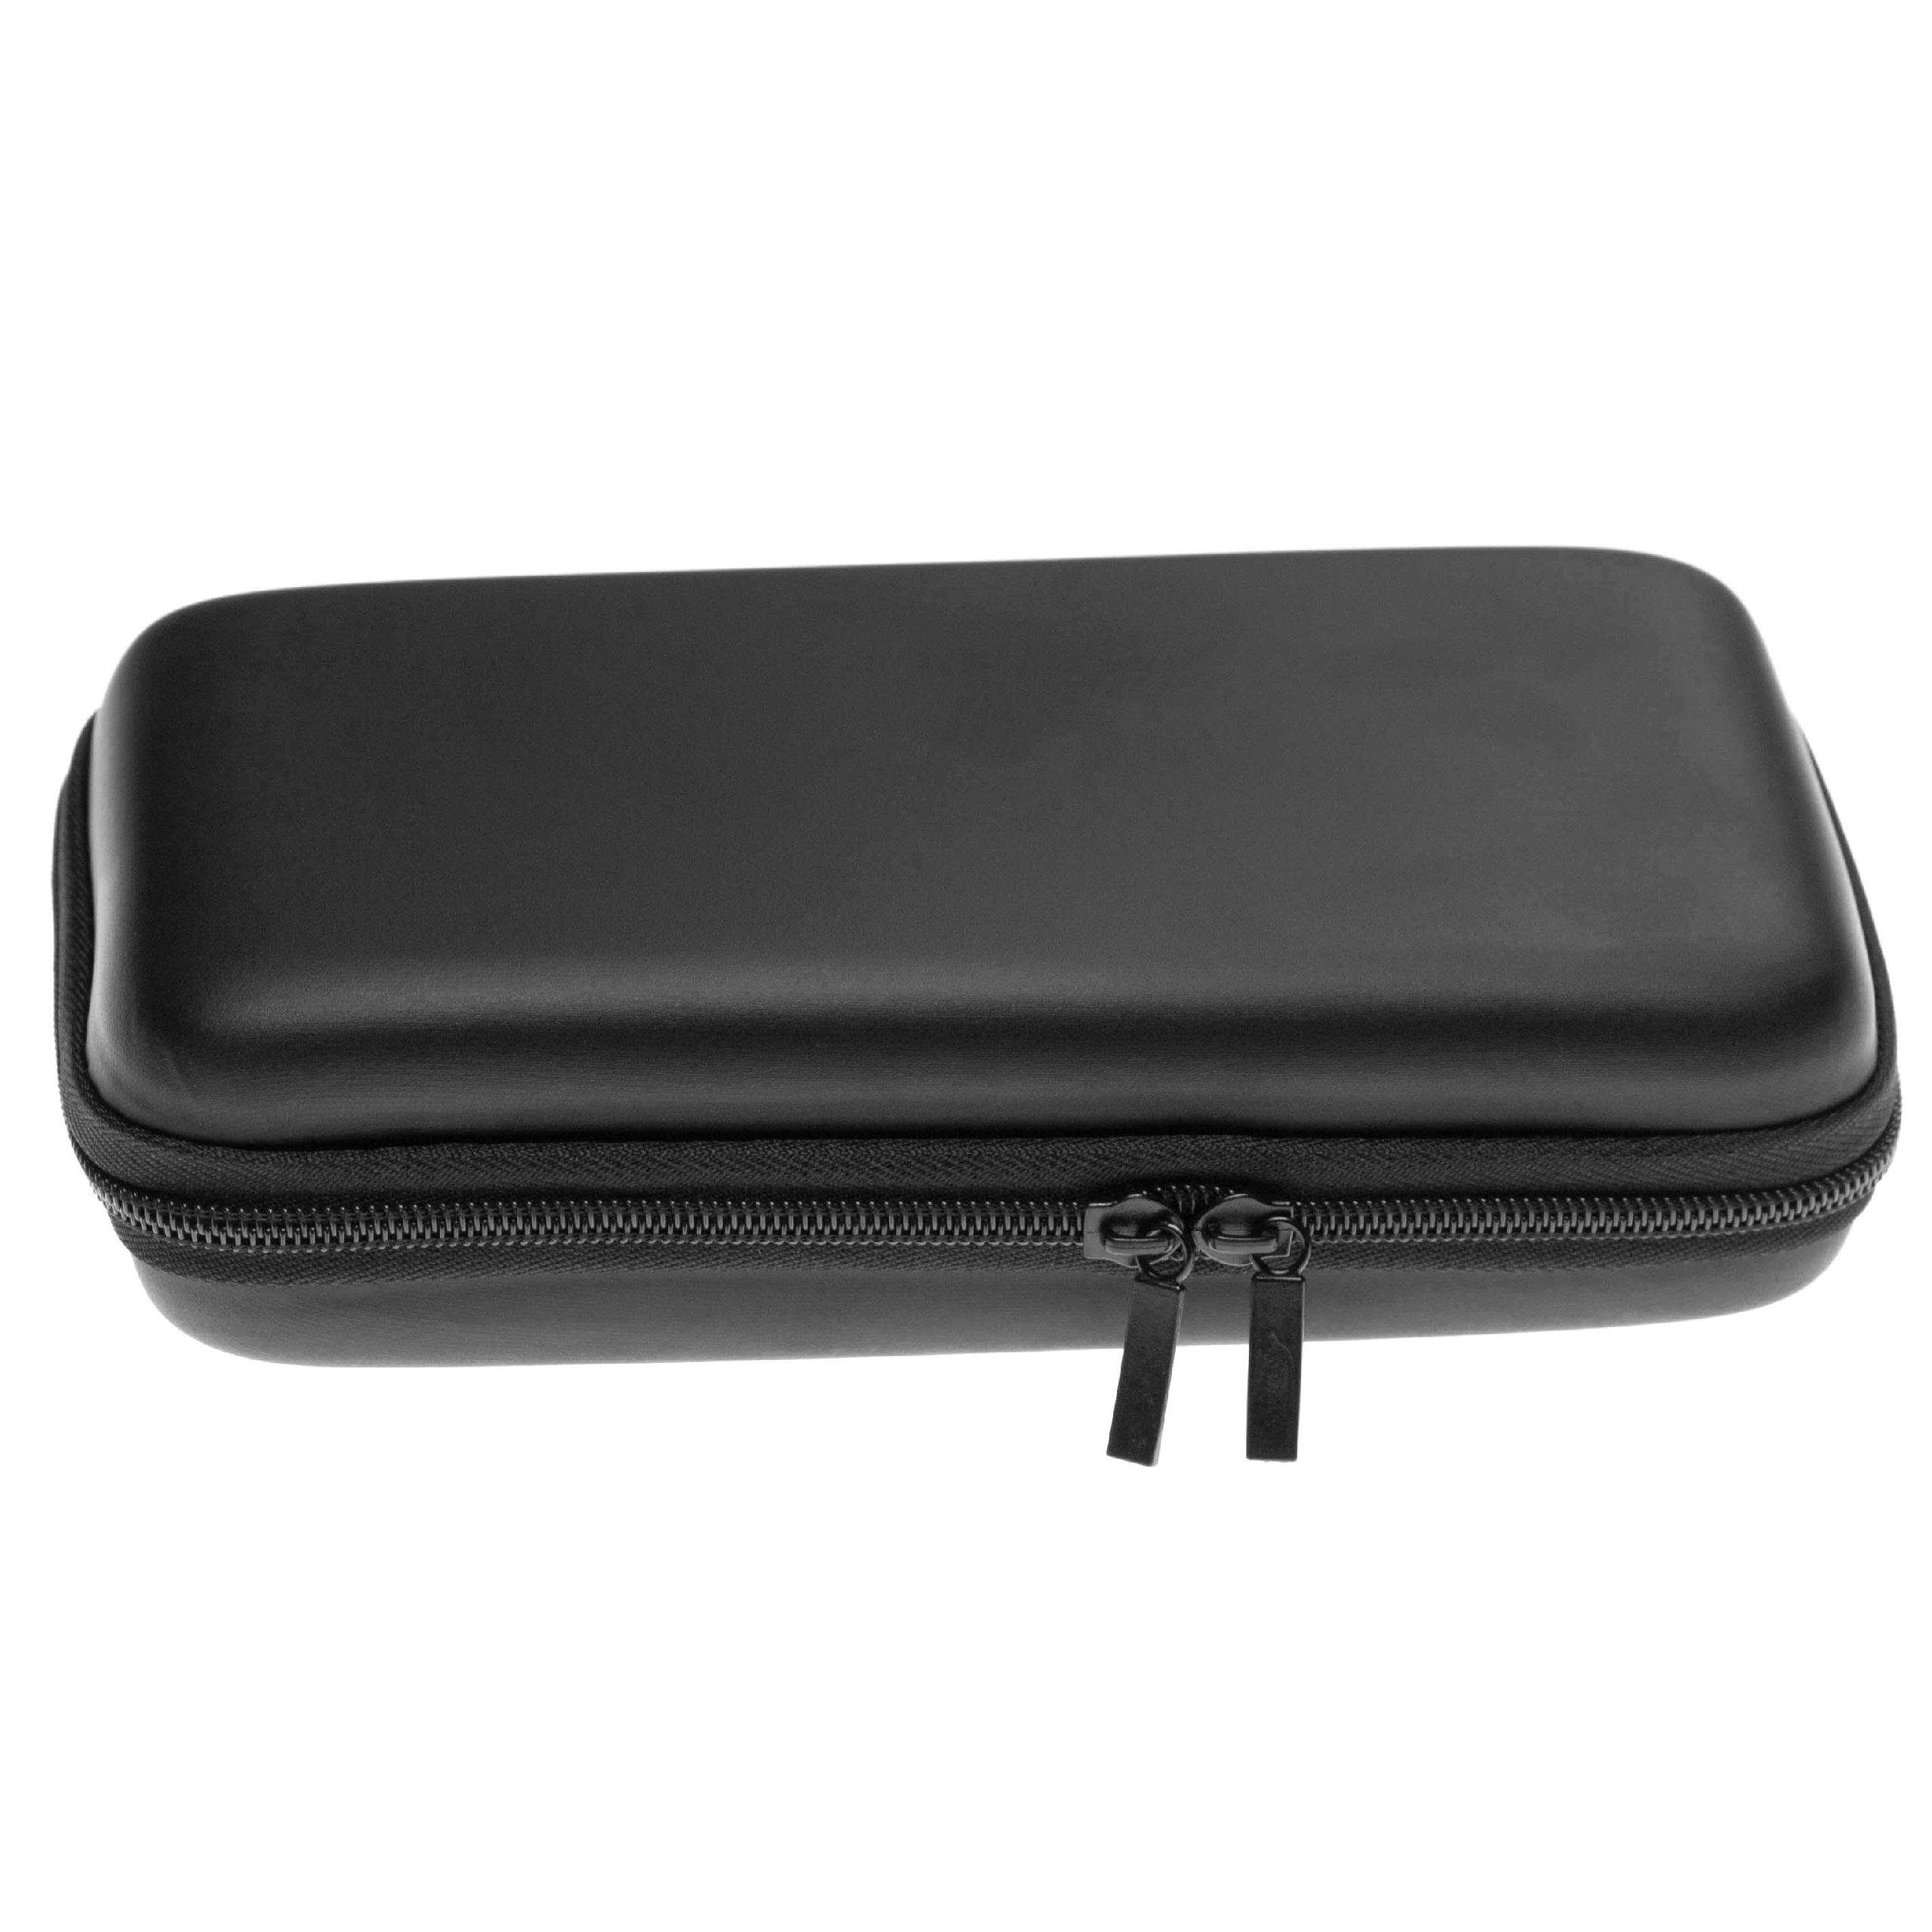 vhbw Carrying Case Games Console - Protective Shell, Travel Bag + Carry Strap with Carabiner, black